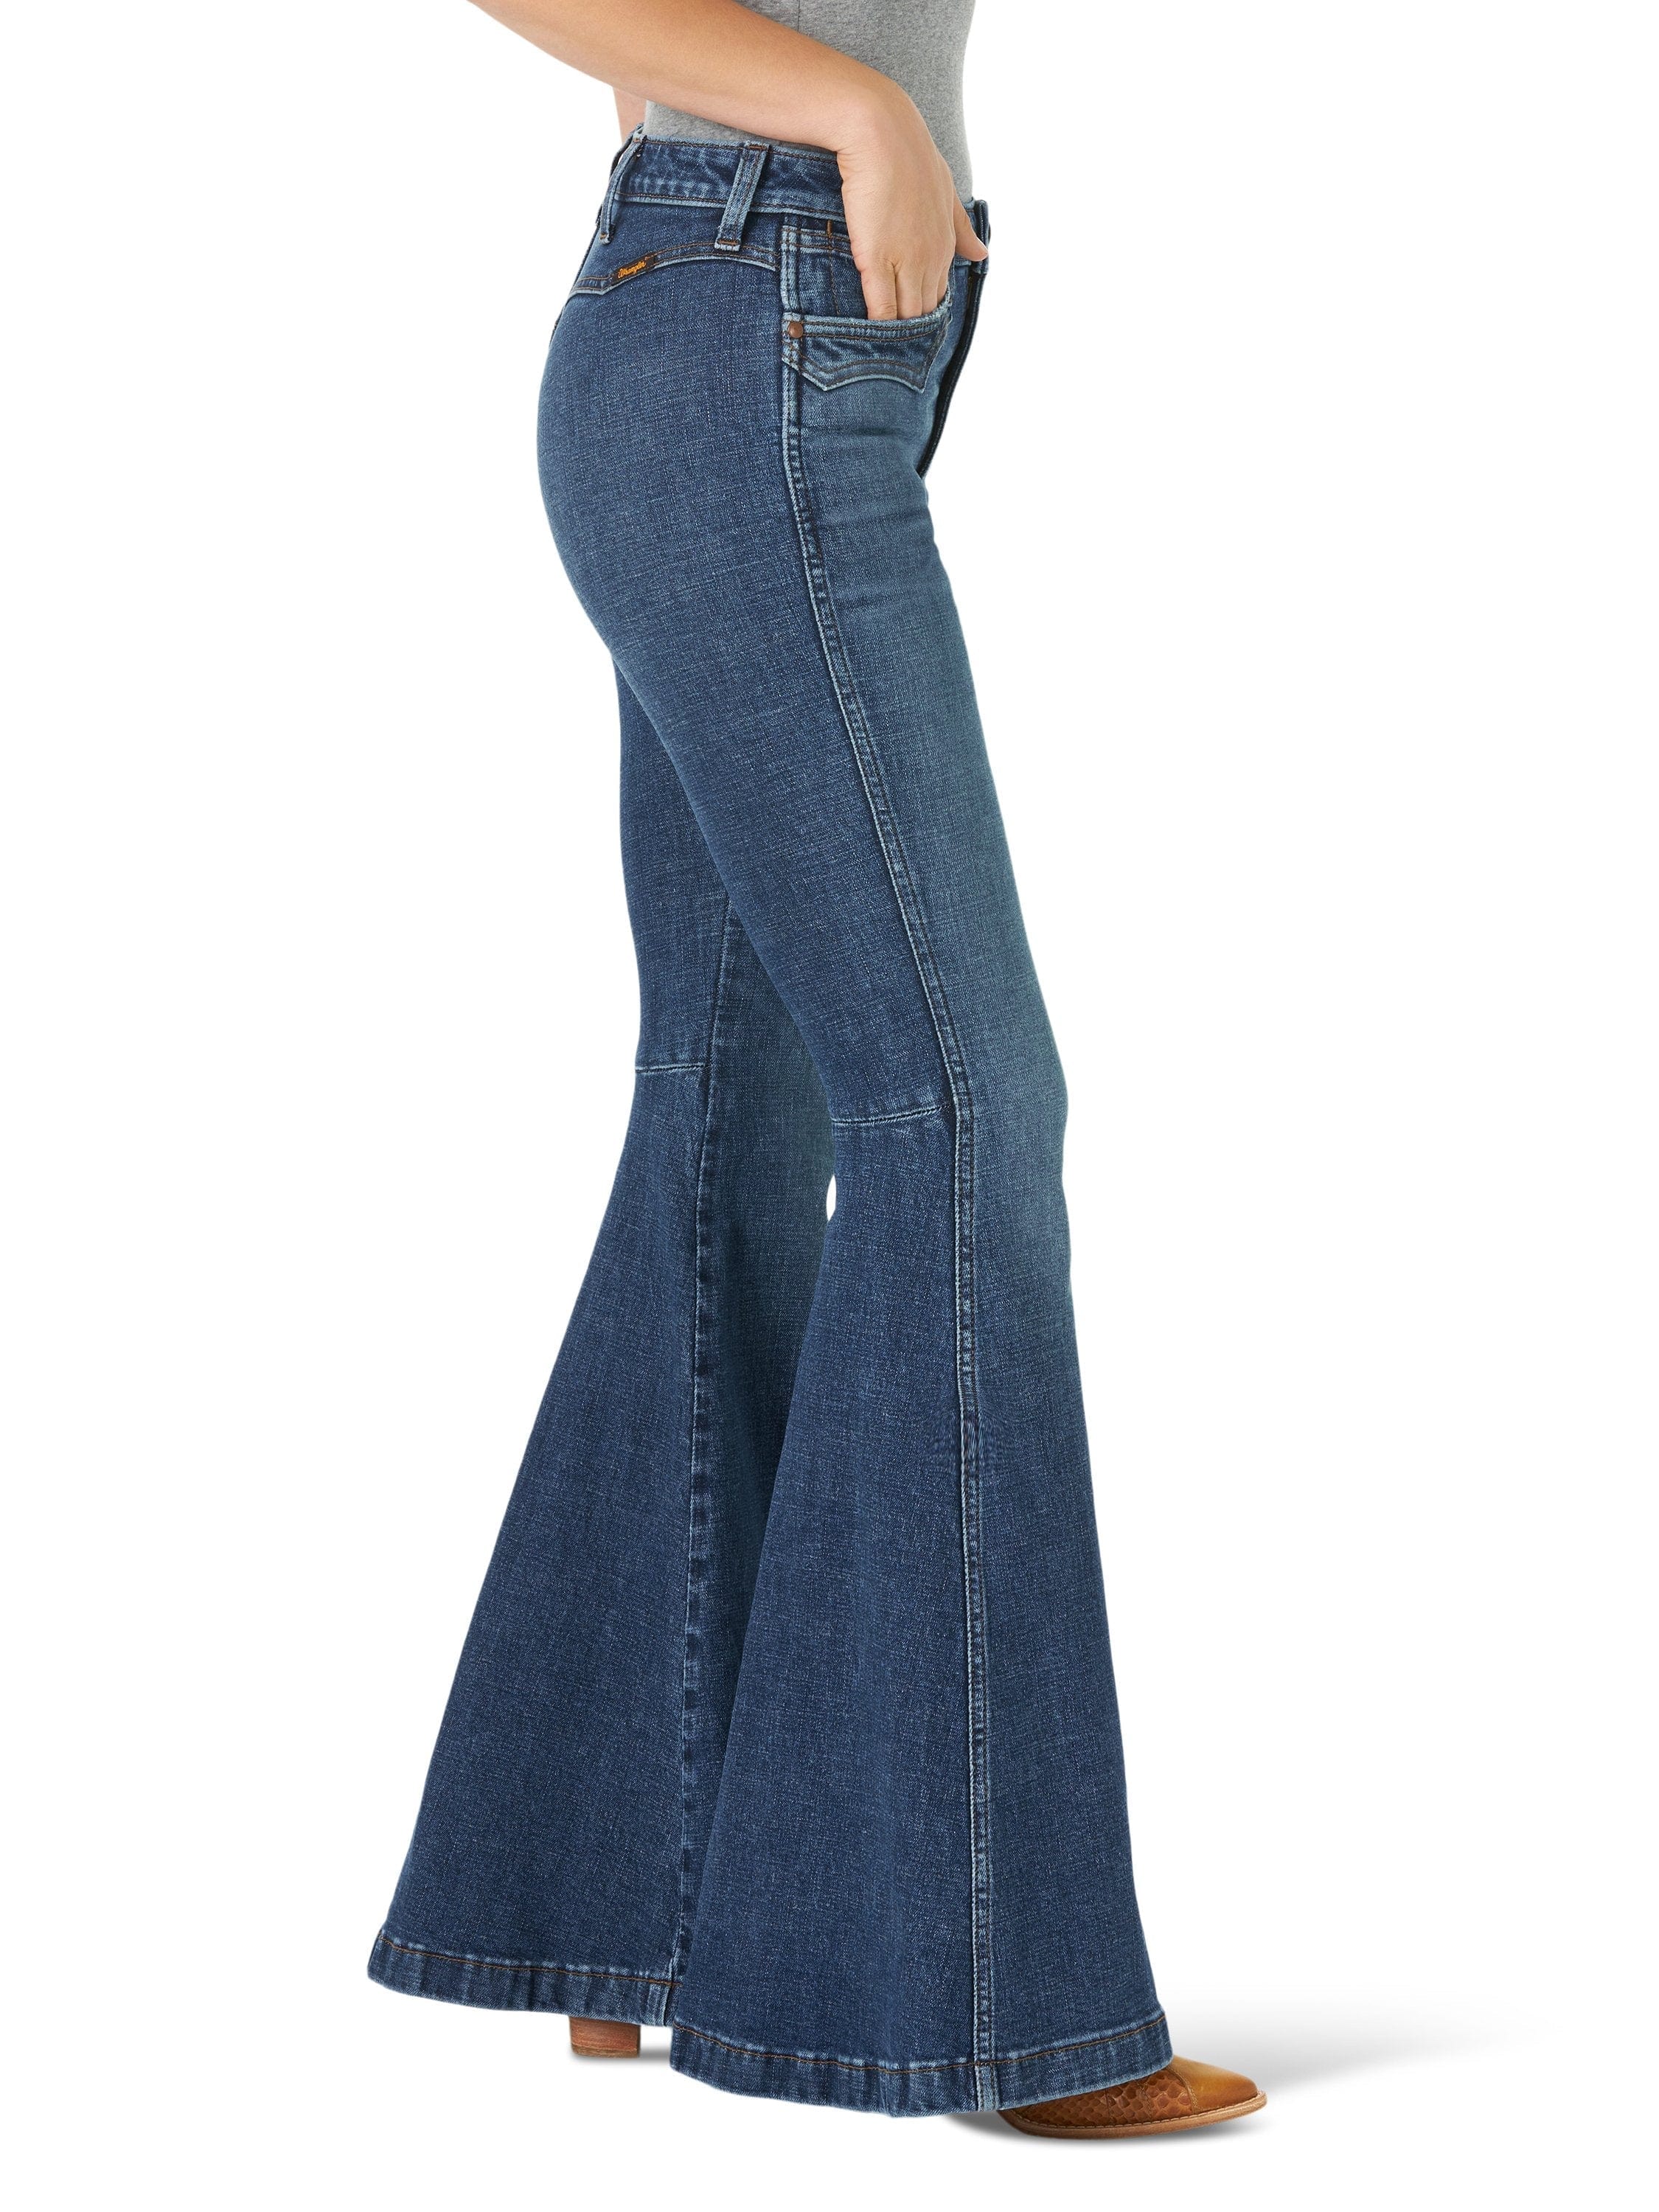 Denim Pants for Women Pants With Pockets Jean Pants 813# Cowgirl